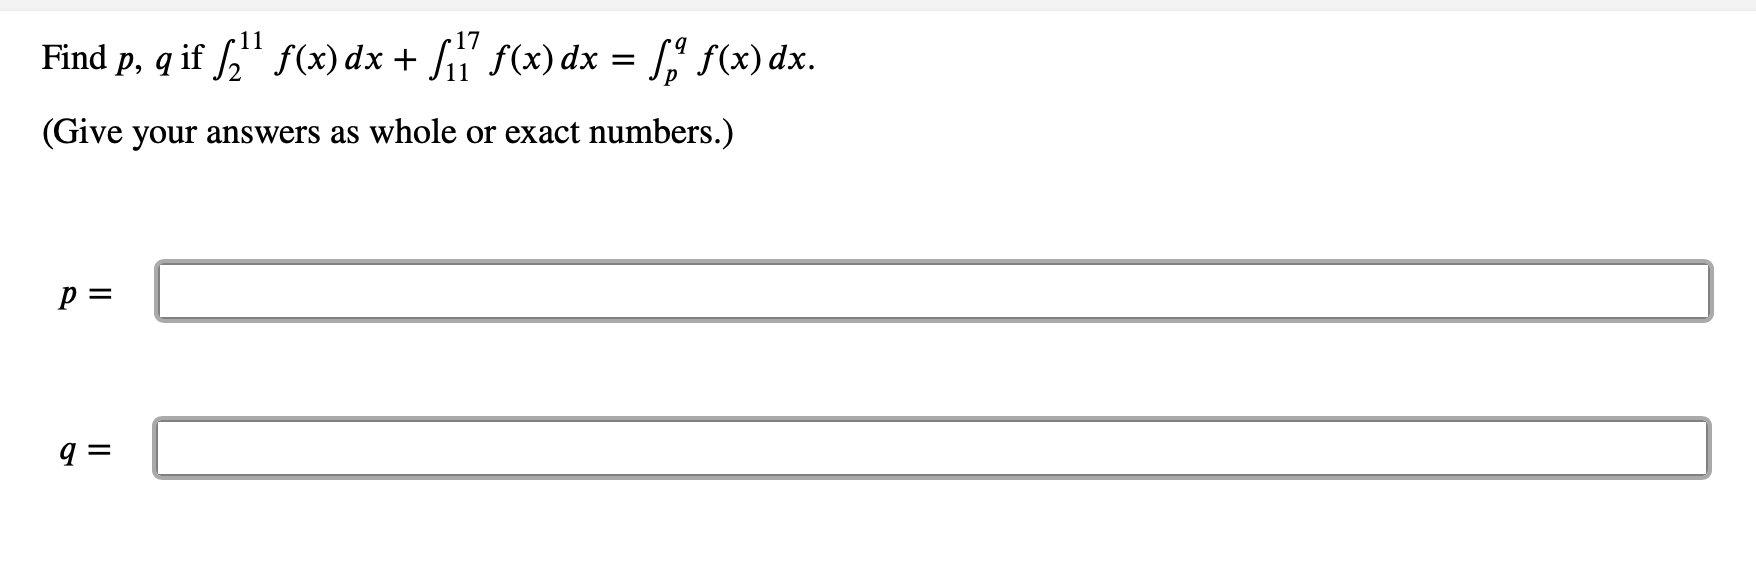 17
Find p, q if ," f(x) dx + Sii' f(x) dx = [" f(x) dx.
(Give your answers as whole or exact numbers.)
p =
q =
